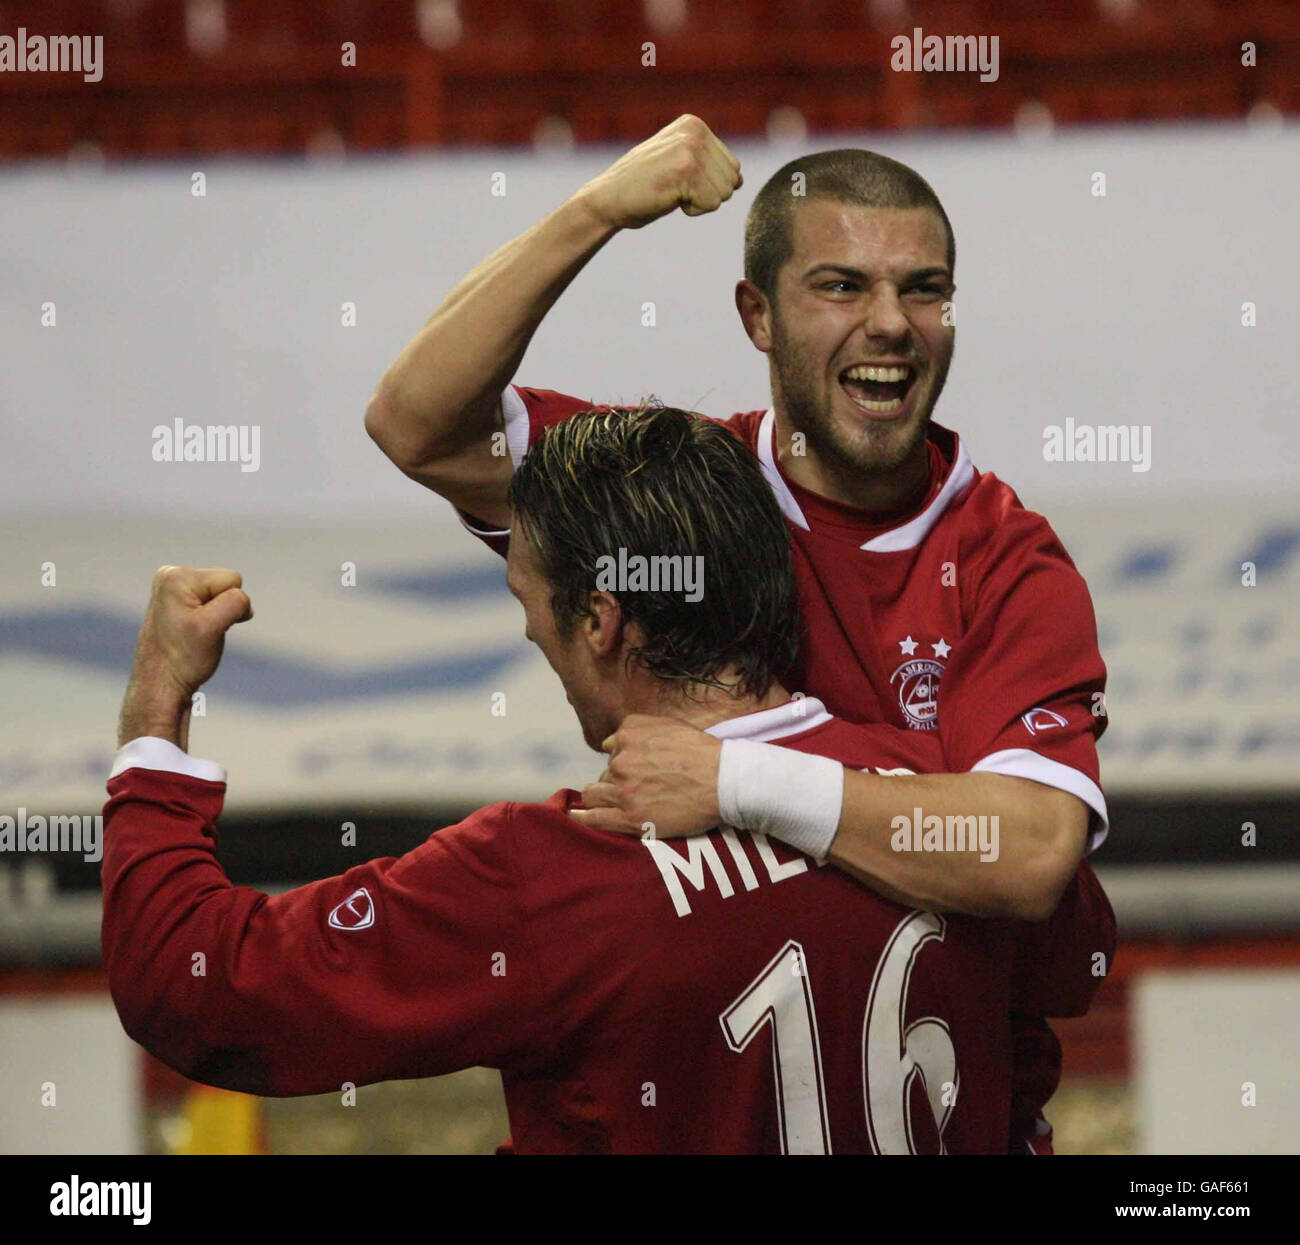 Rugby Union - 2008 Bank Of Scotland Corporate Autumn Test - Scotland v Canada - Pittodrie Stadium. Aberdeen's Richard Foster celebrates scoring against Copenhagen FC during their Uefa Cup Group B match at Pittodie Stadium, Aberdeen. Stock Photo